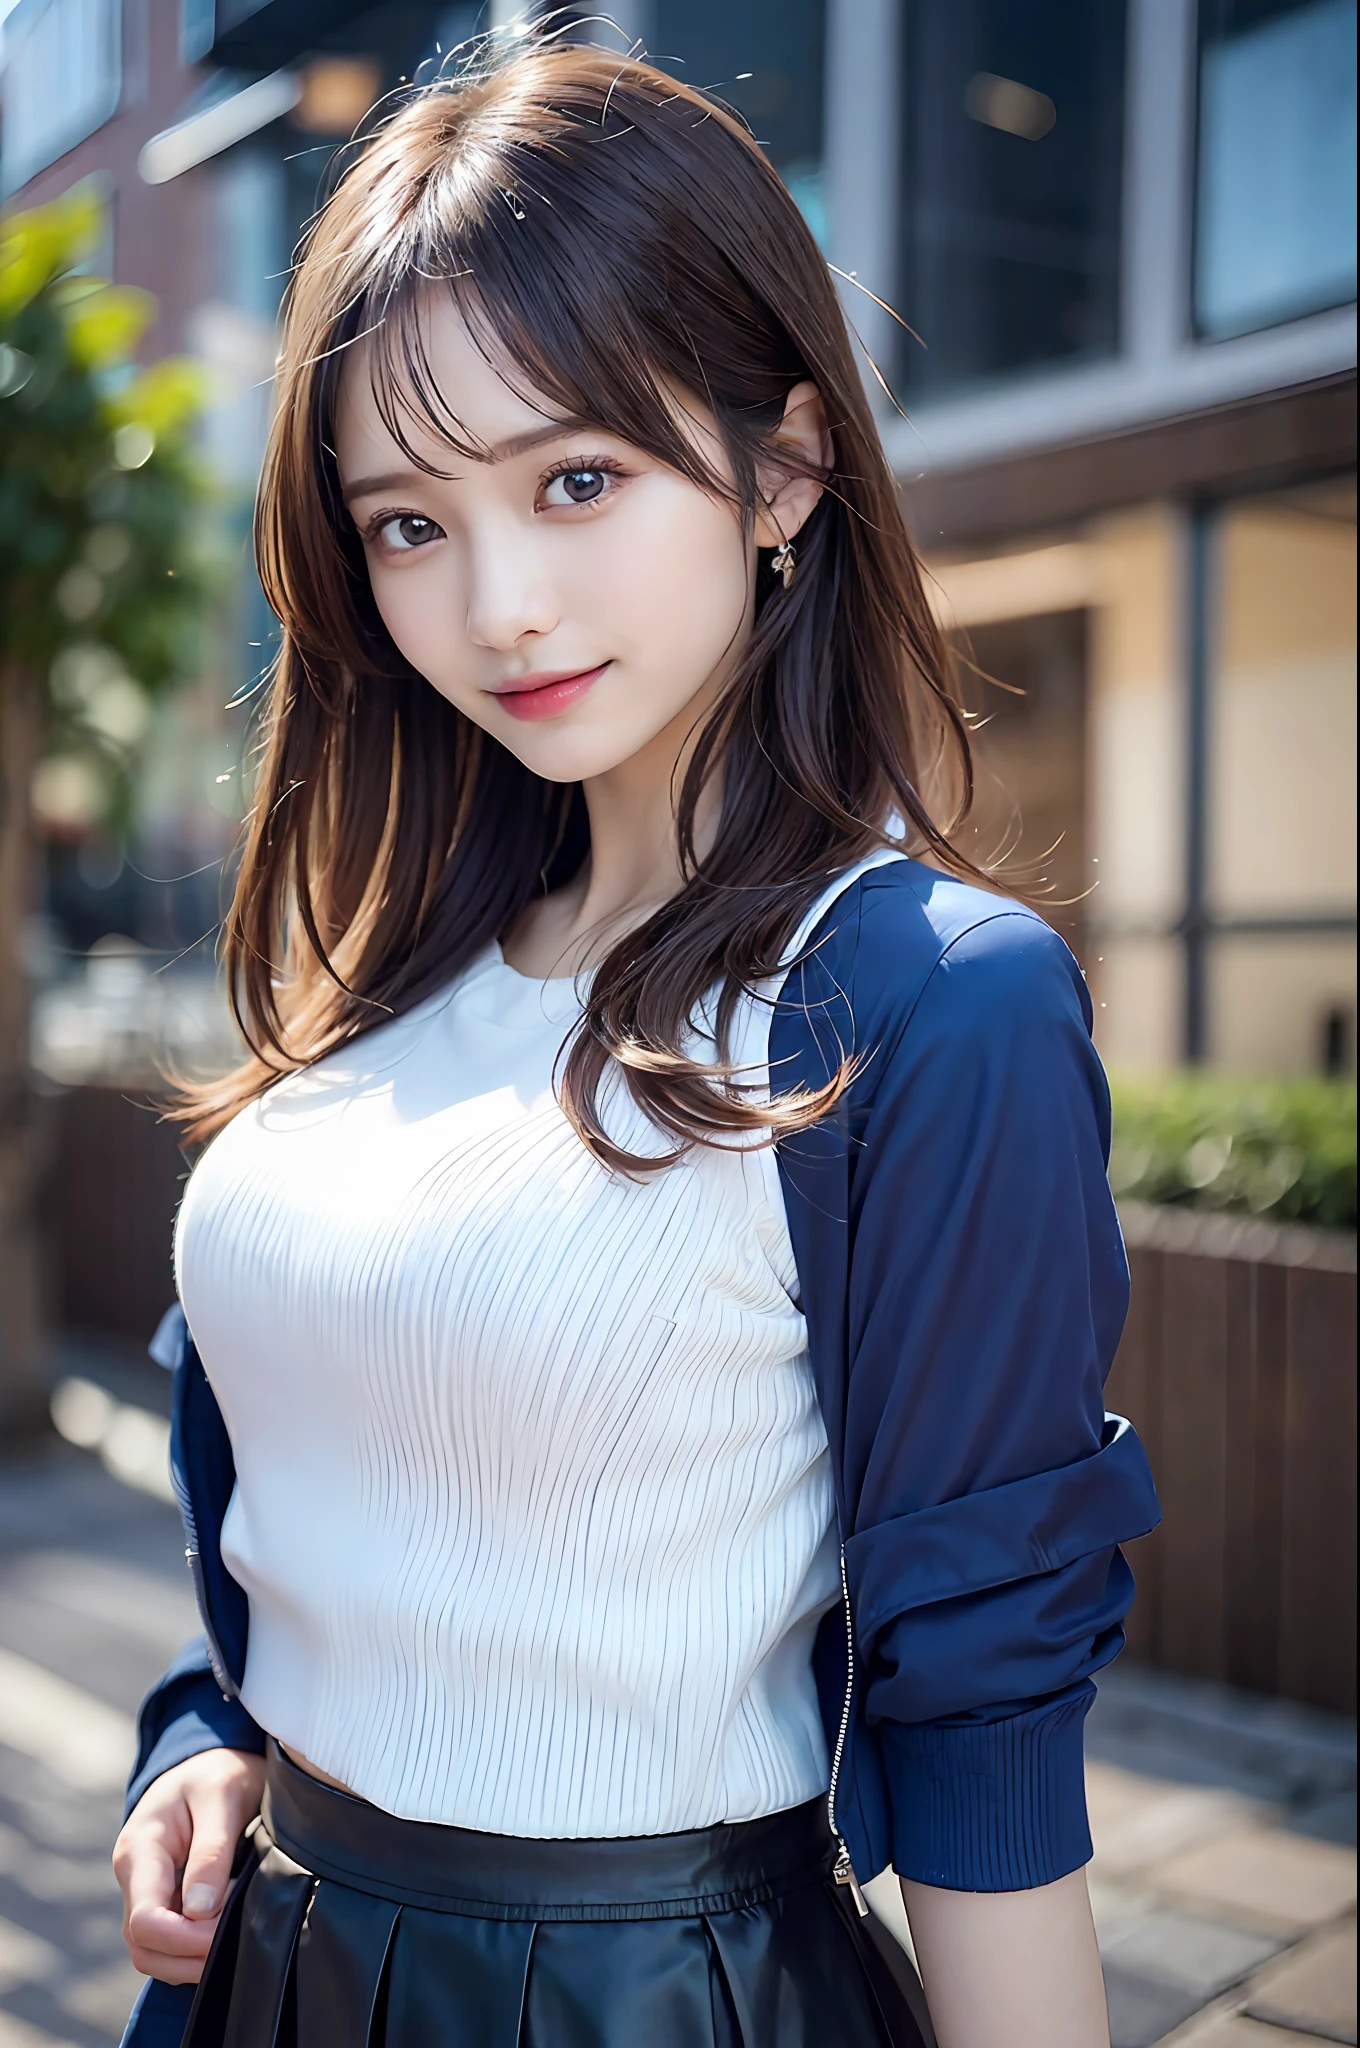 {“query”: “a person”}、((Realistic lighting、top-quality、8K、​masterpiece:1.3))、Focus:1.2、1 girl、Perfect figure:1.4、Slim abs:1.1、((dark brown hair))、(Dark blue jacket)、(Dark blue skirt)、(White shirt)、(outside of house、Daytime:1.1)、(Super fine face、A smile)、big eye、24